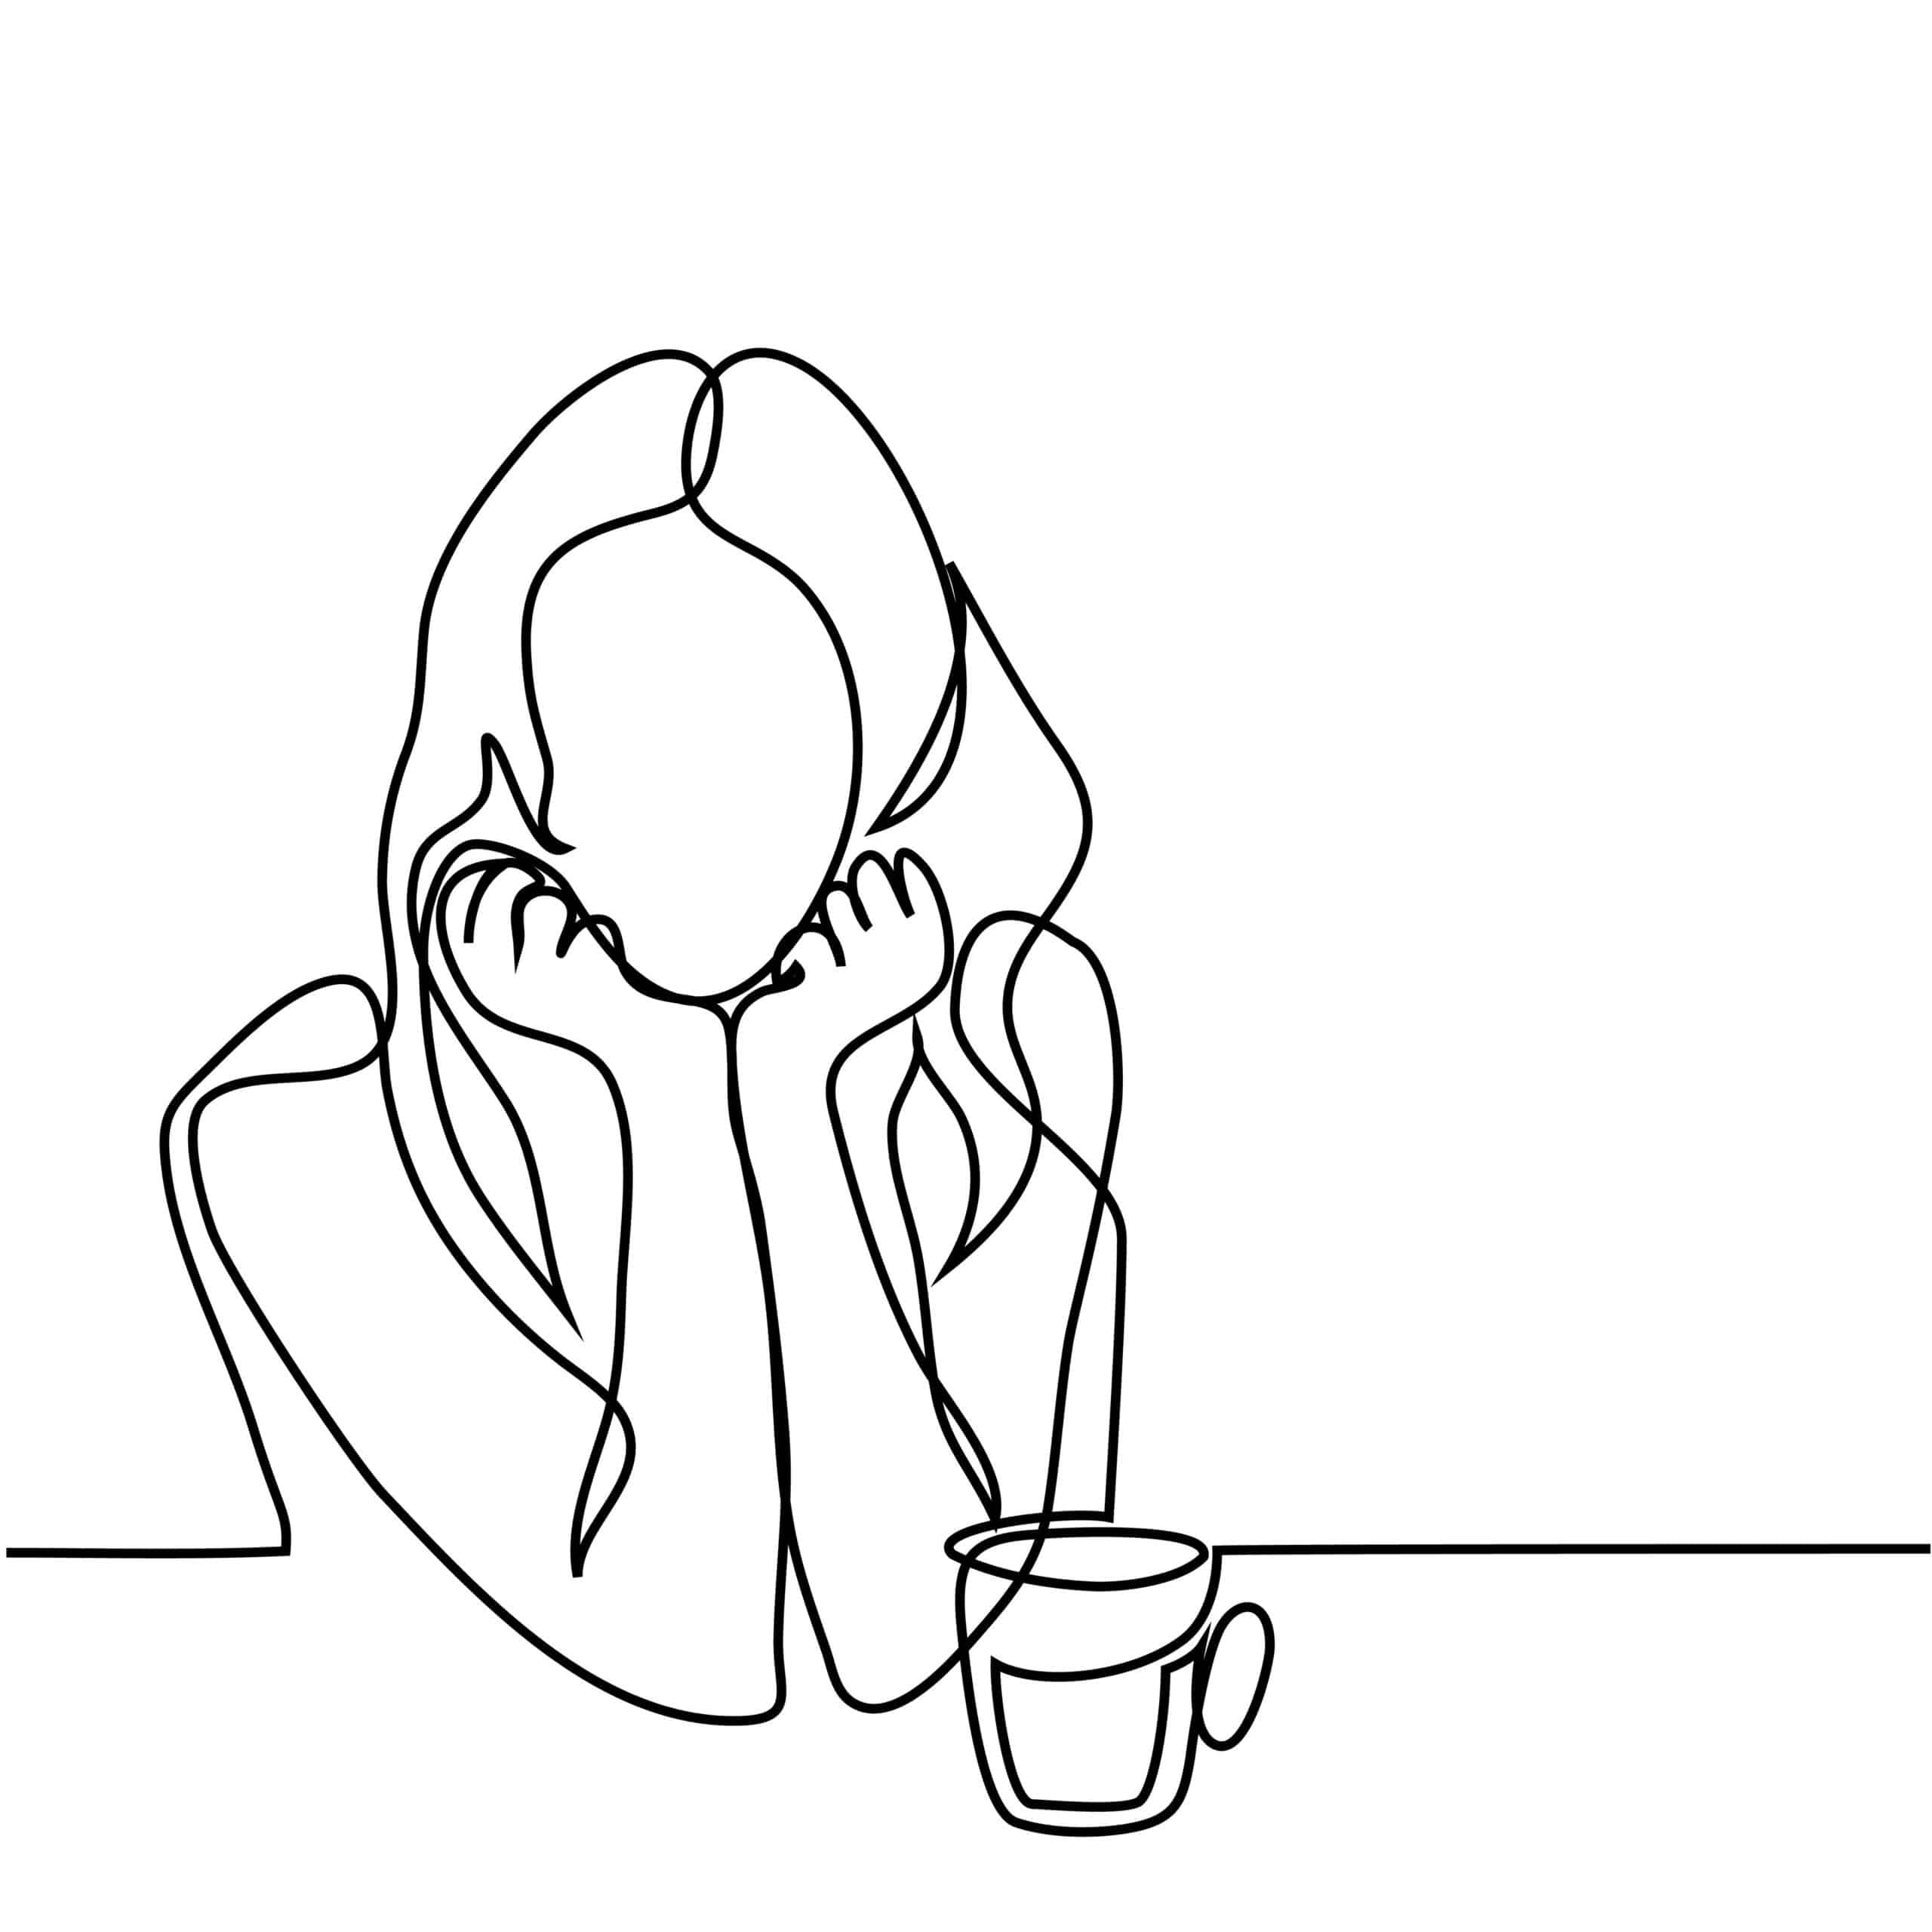 Continuous line drawing. Abstract portrait of a woman with cup of tea.